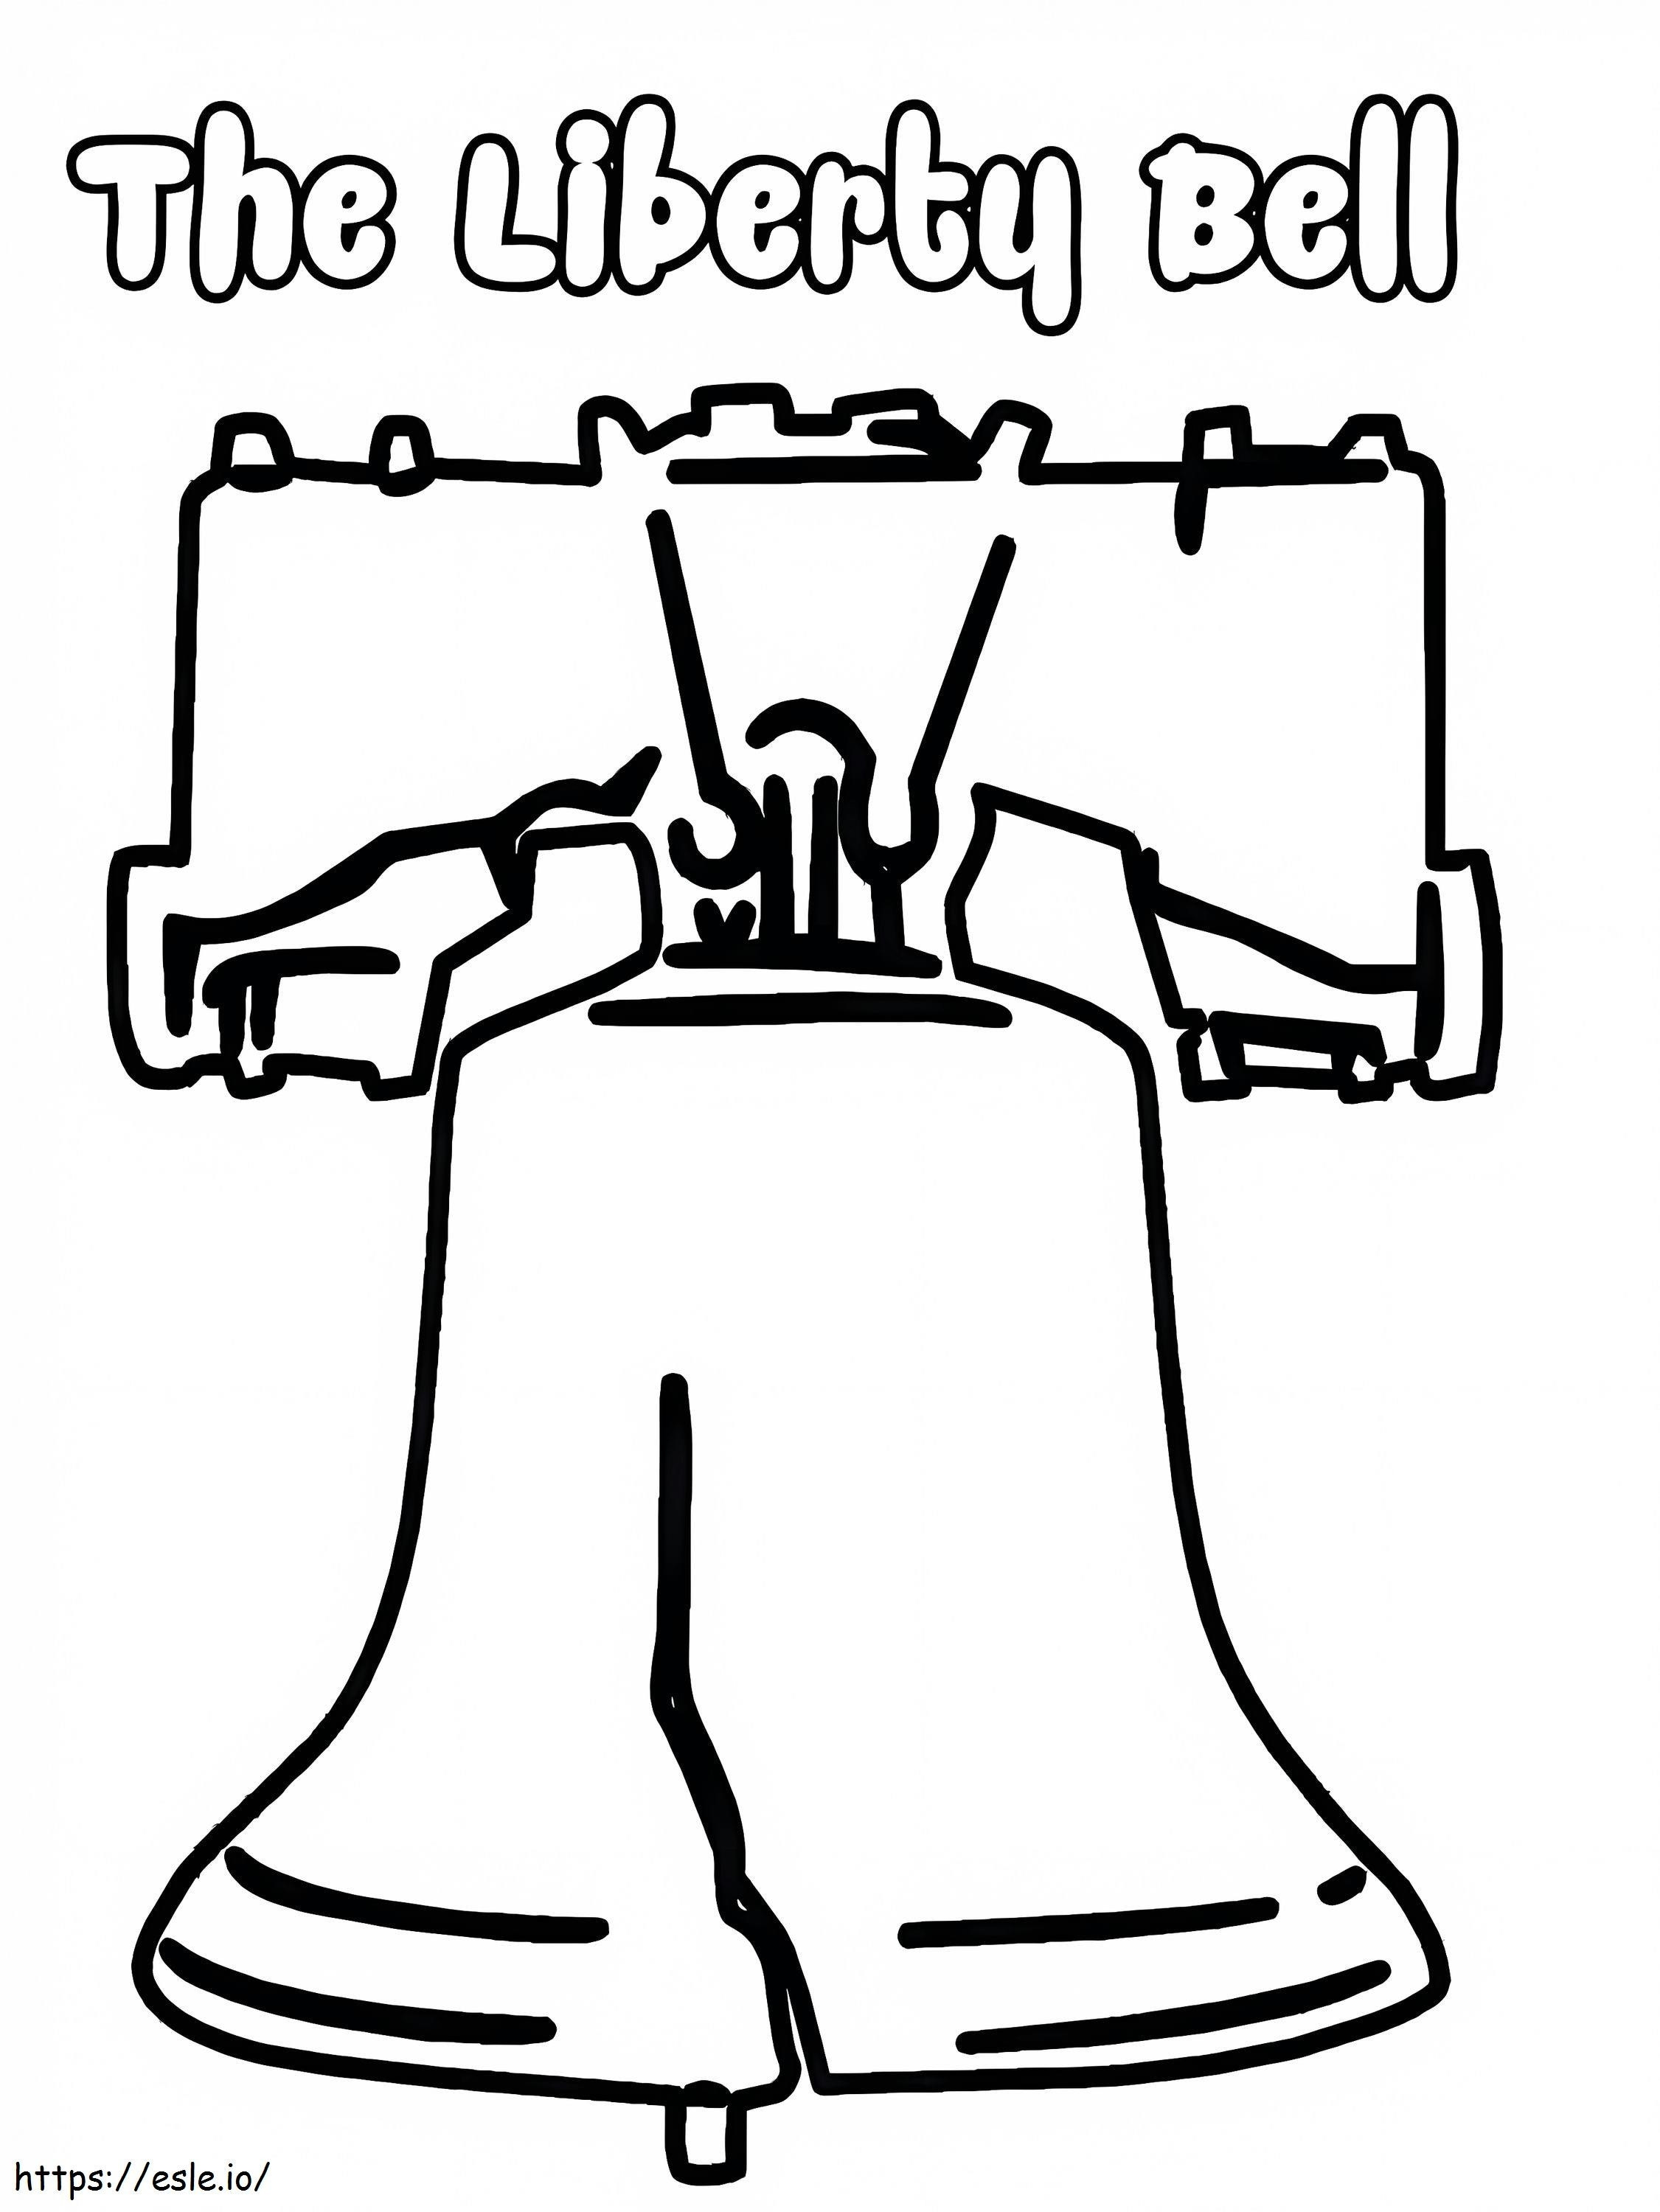 Free Liberty Bell coloring page